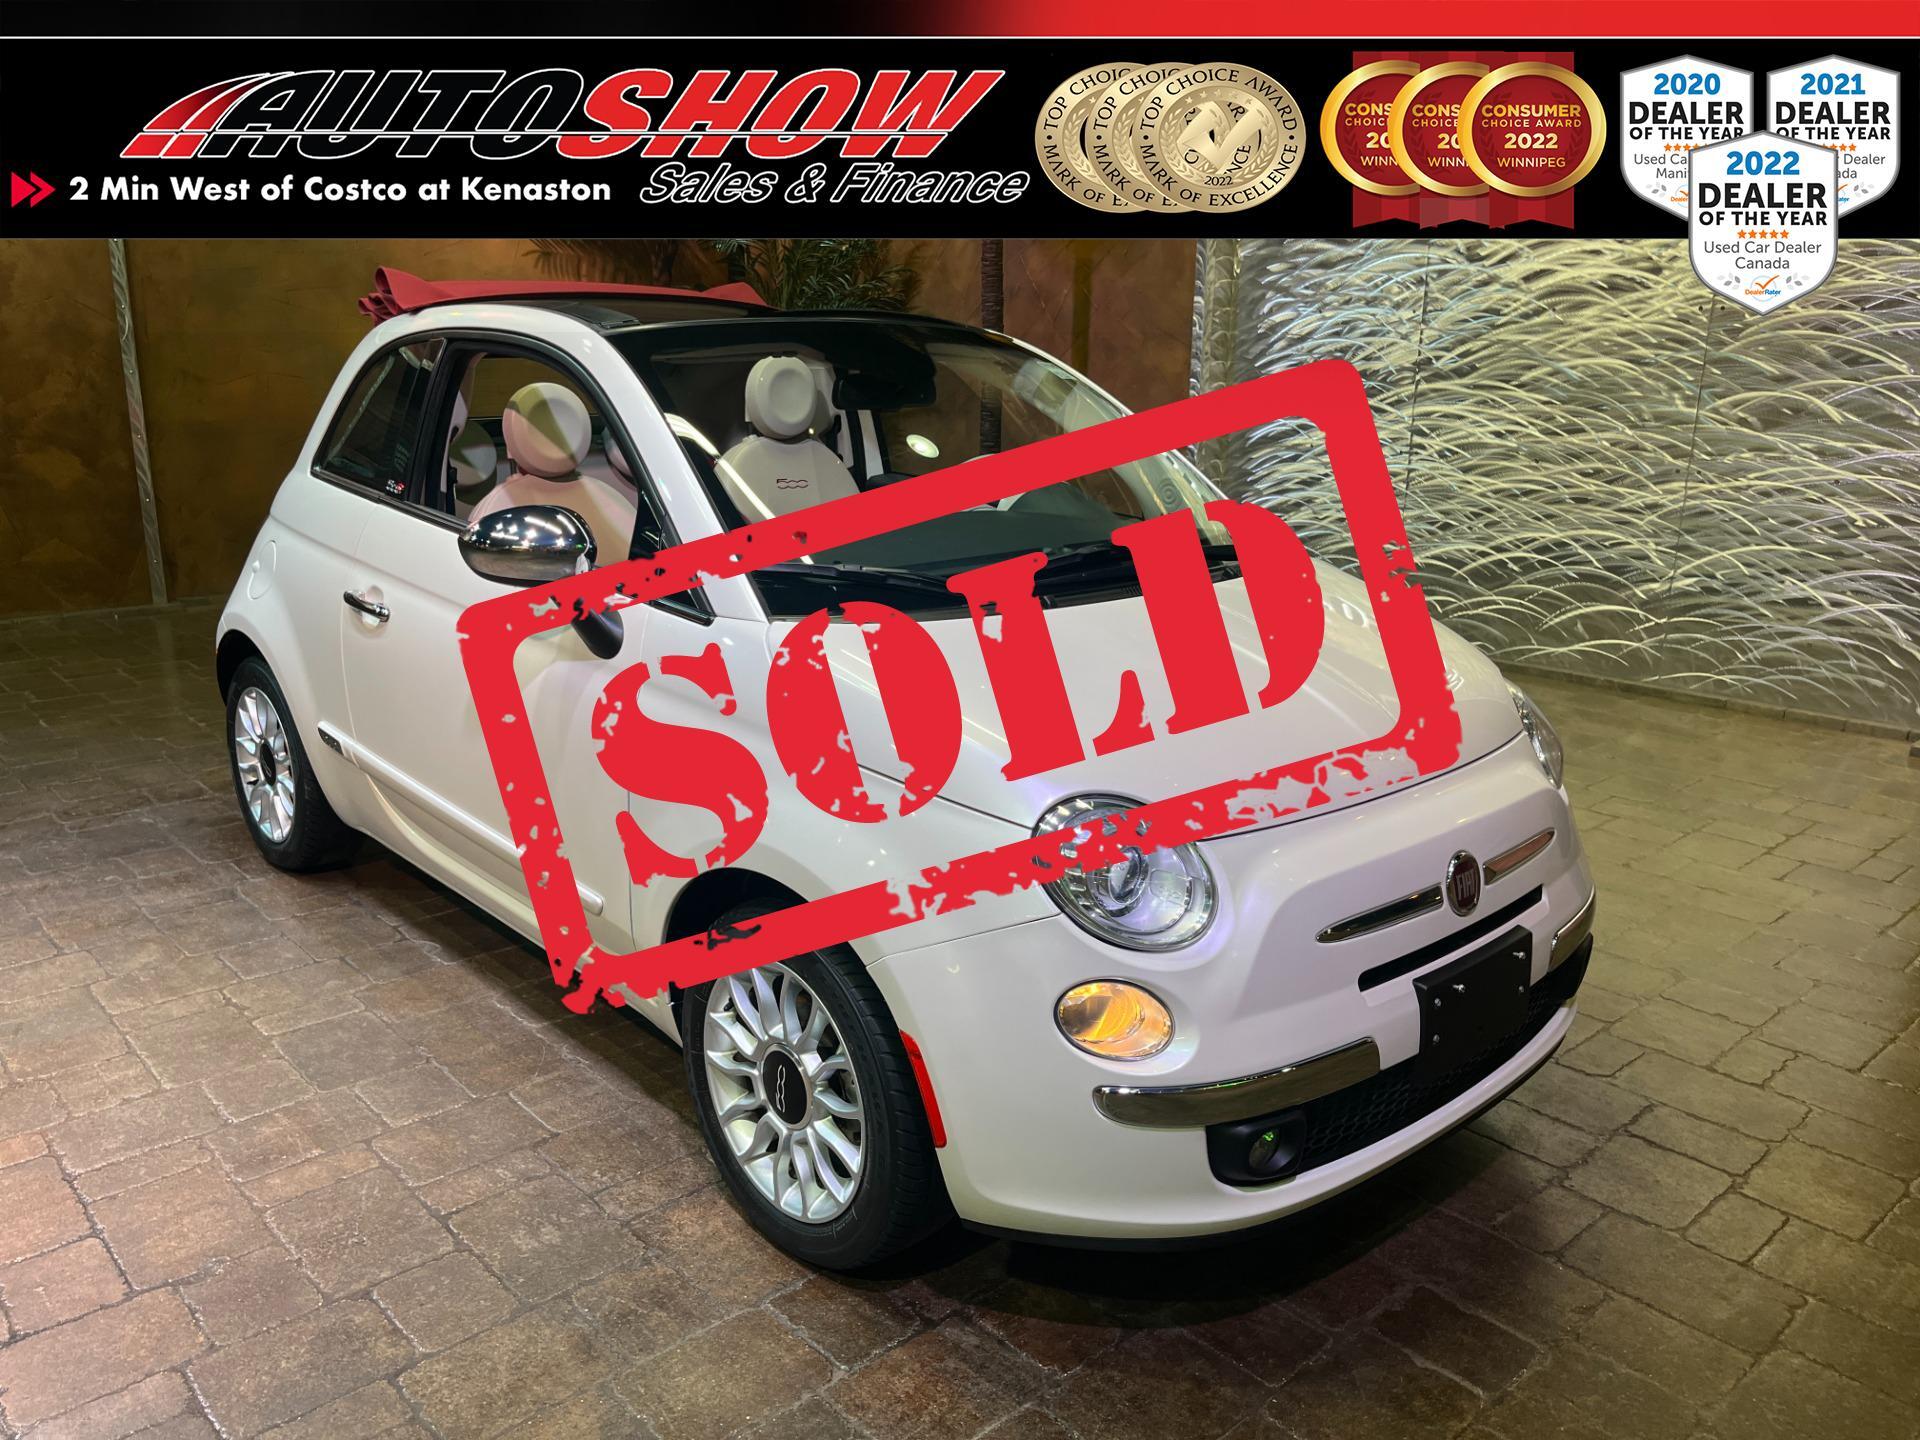 2014 Fiat 500C Lounge Convertible M/T - Red/White Htd Lthr